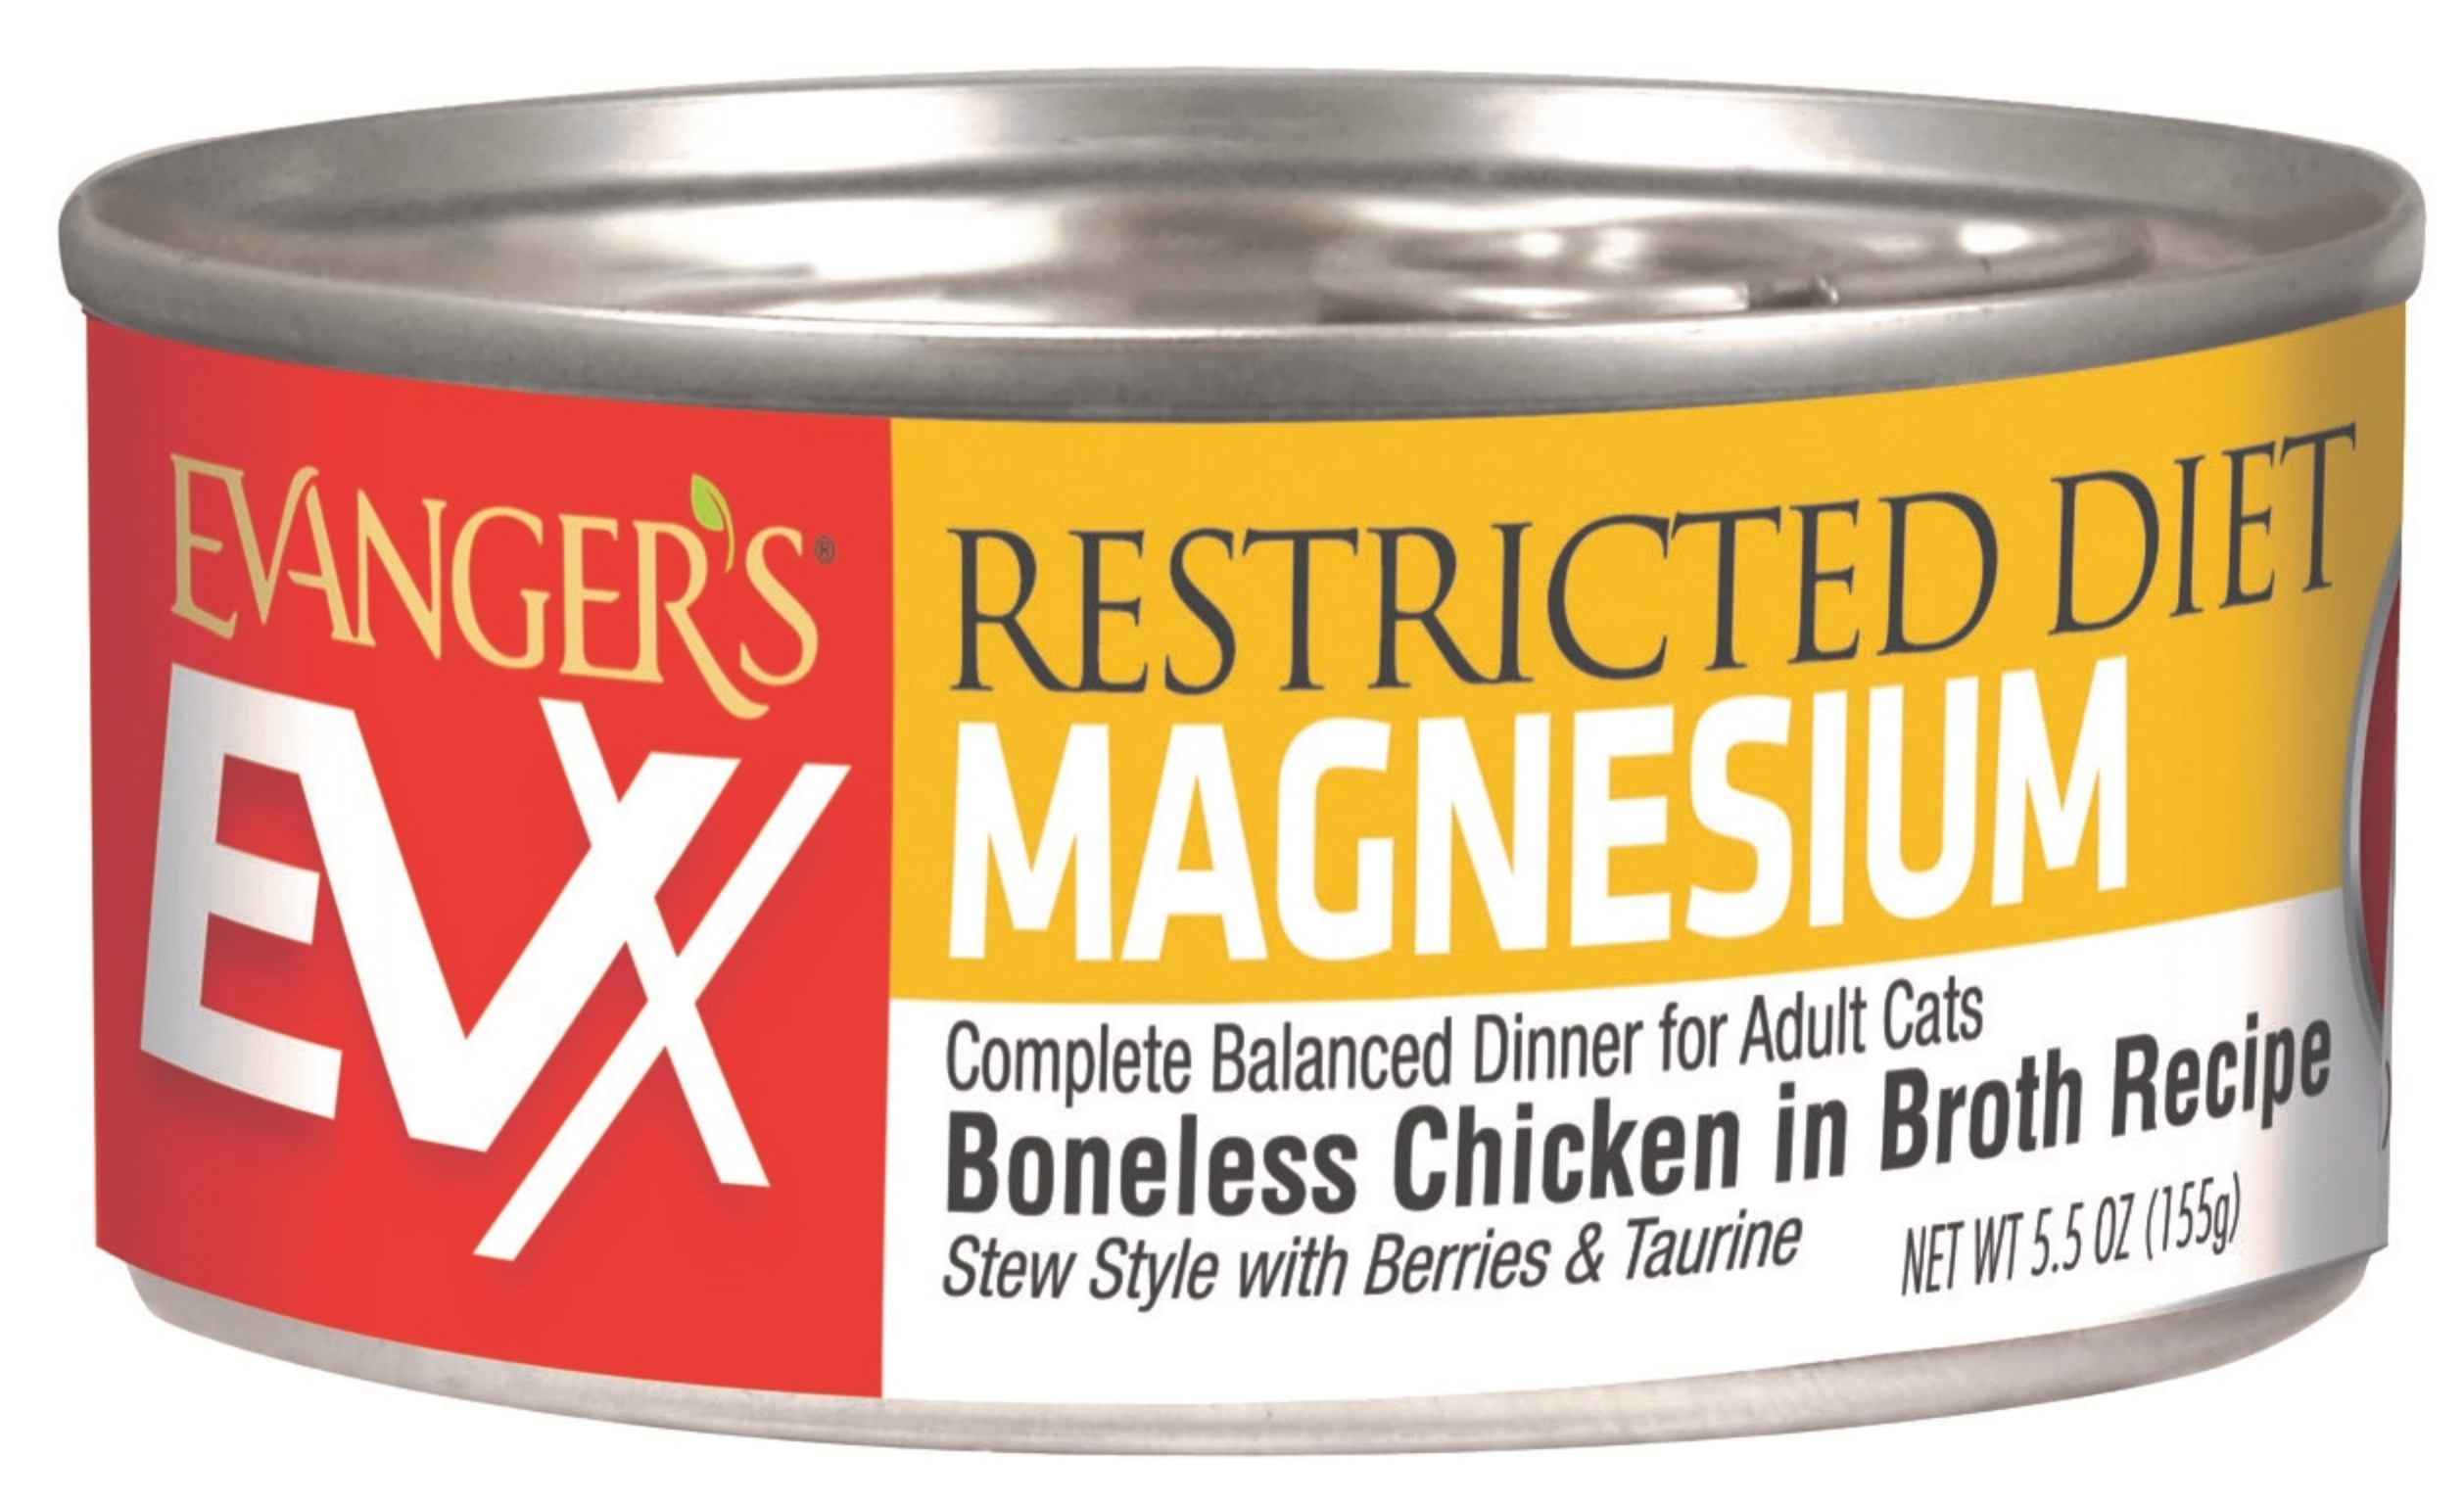 Evanger's EVX Restricted Urinary Diet, Controlled Magnesium Boneless Chicken in Broth Recipe 5.5 oz, CASE 24 cans